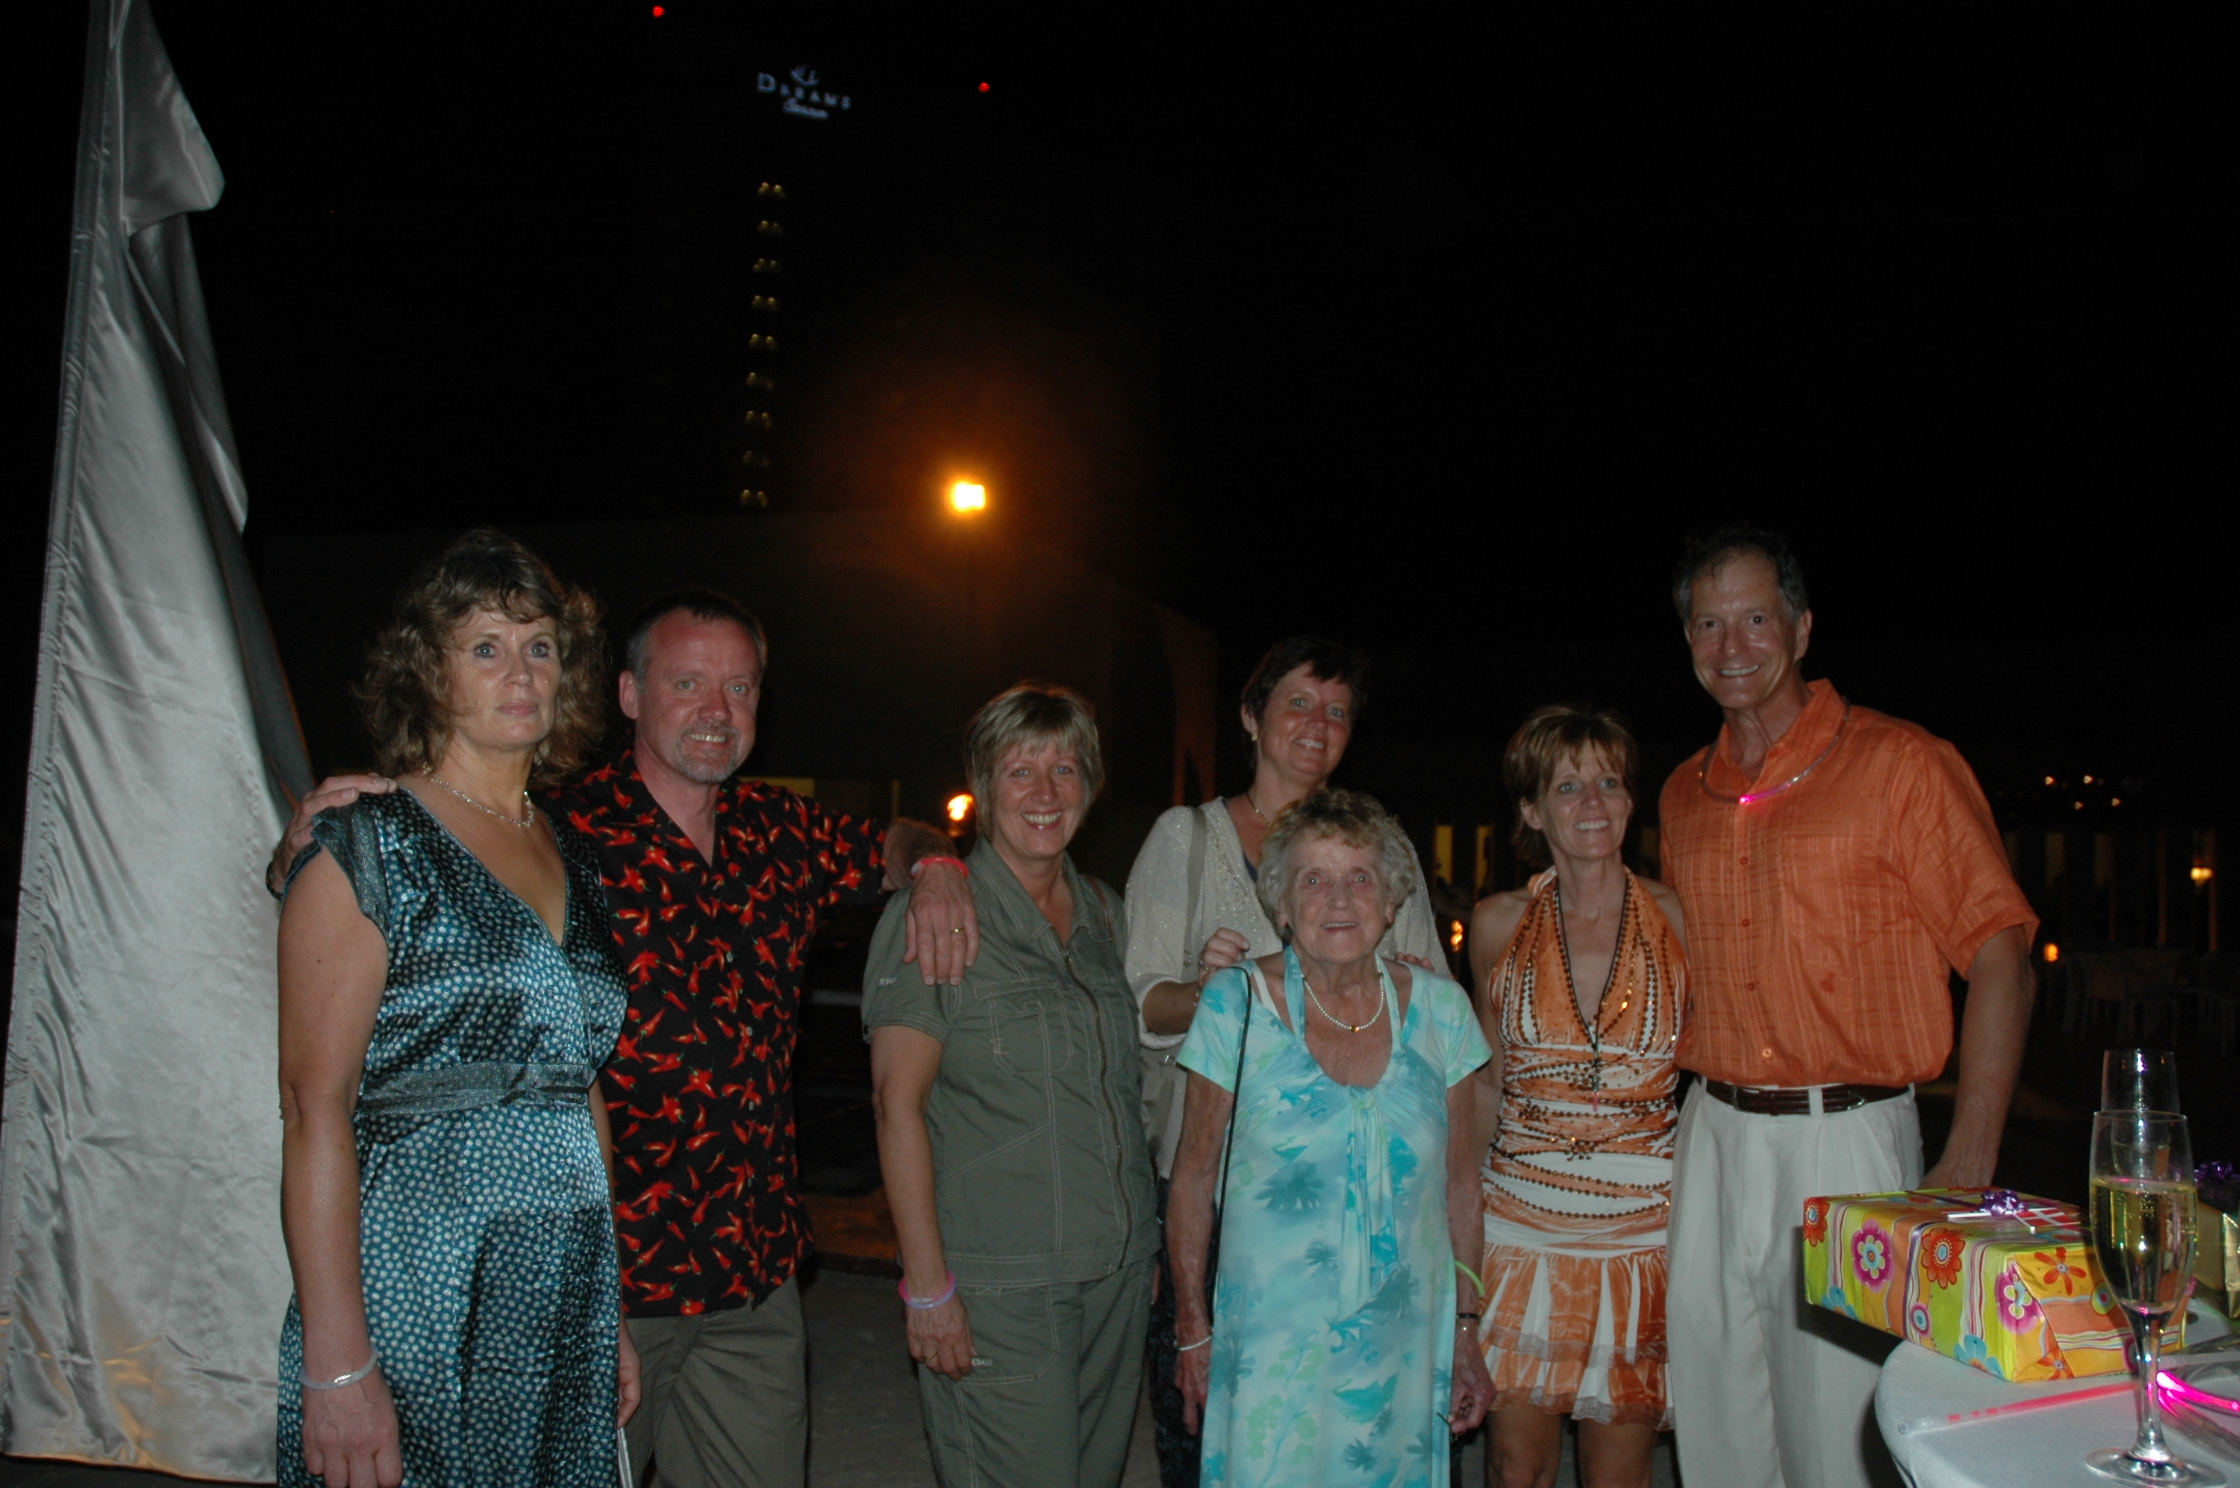 The Queen's Family in Cancun... Ilse, Steffen, Birgit, Hanne, Karen, Jytte and the honorarily 